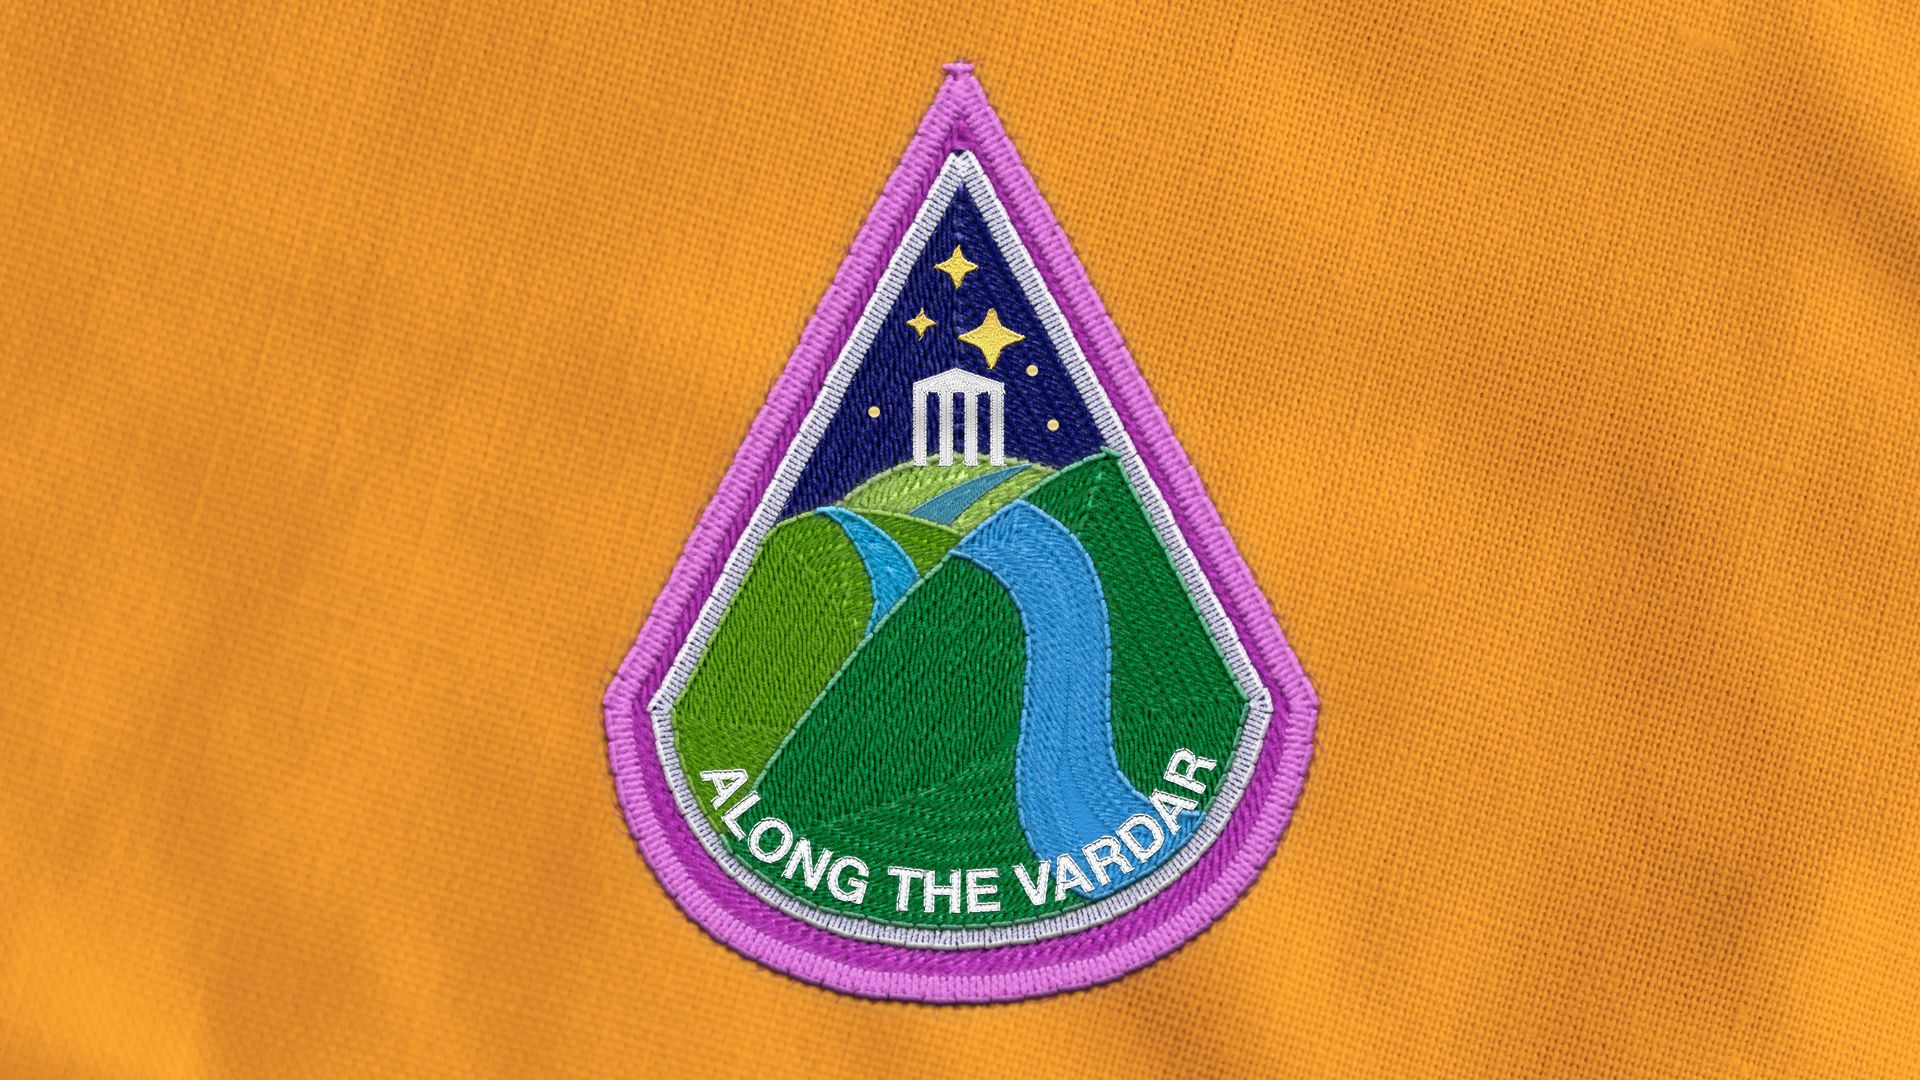 Illustration of an astronaut badge depicting a river over rolling hills with a Grecian temple in the background, the words "ALONG THE VARDAR" are on the badge. 